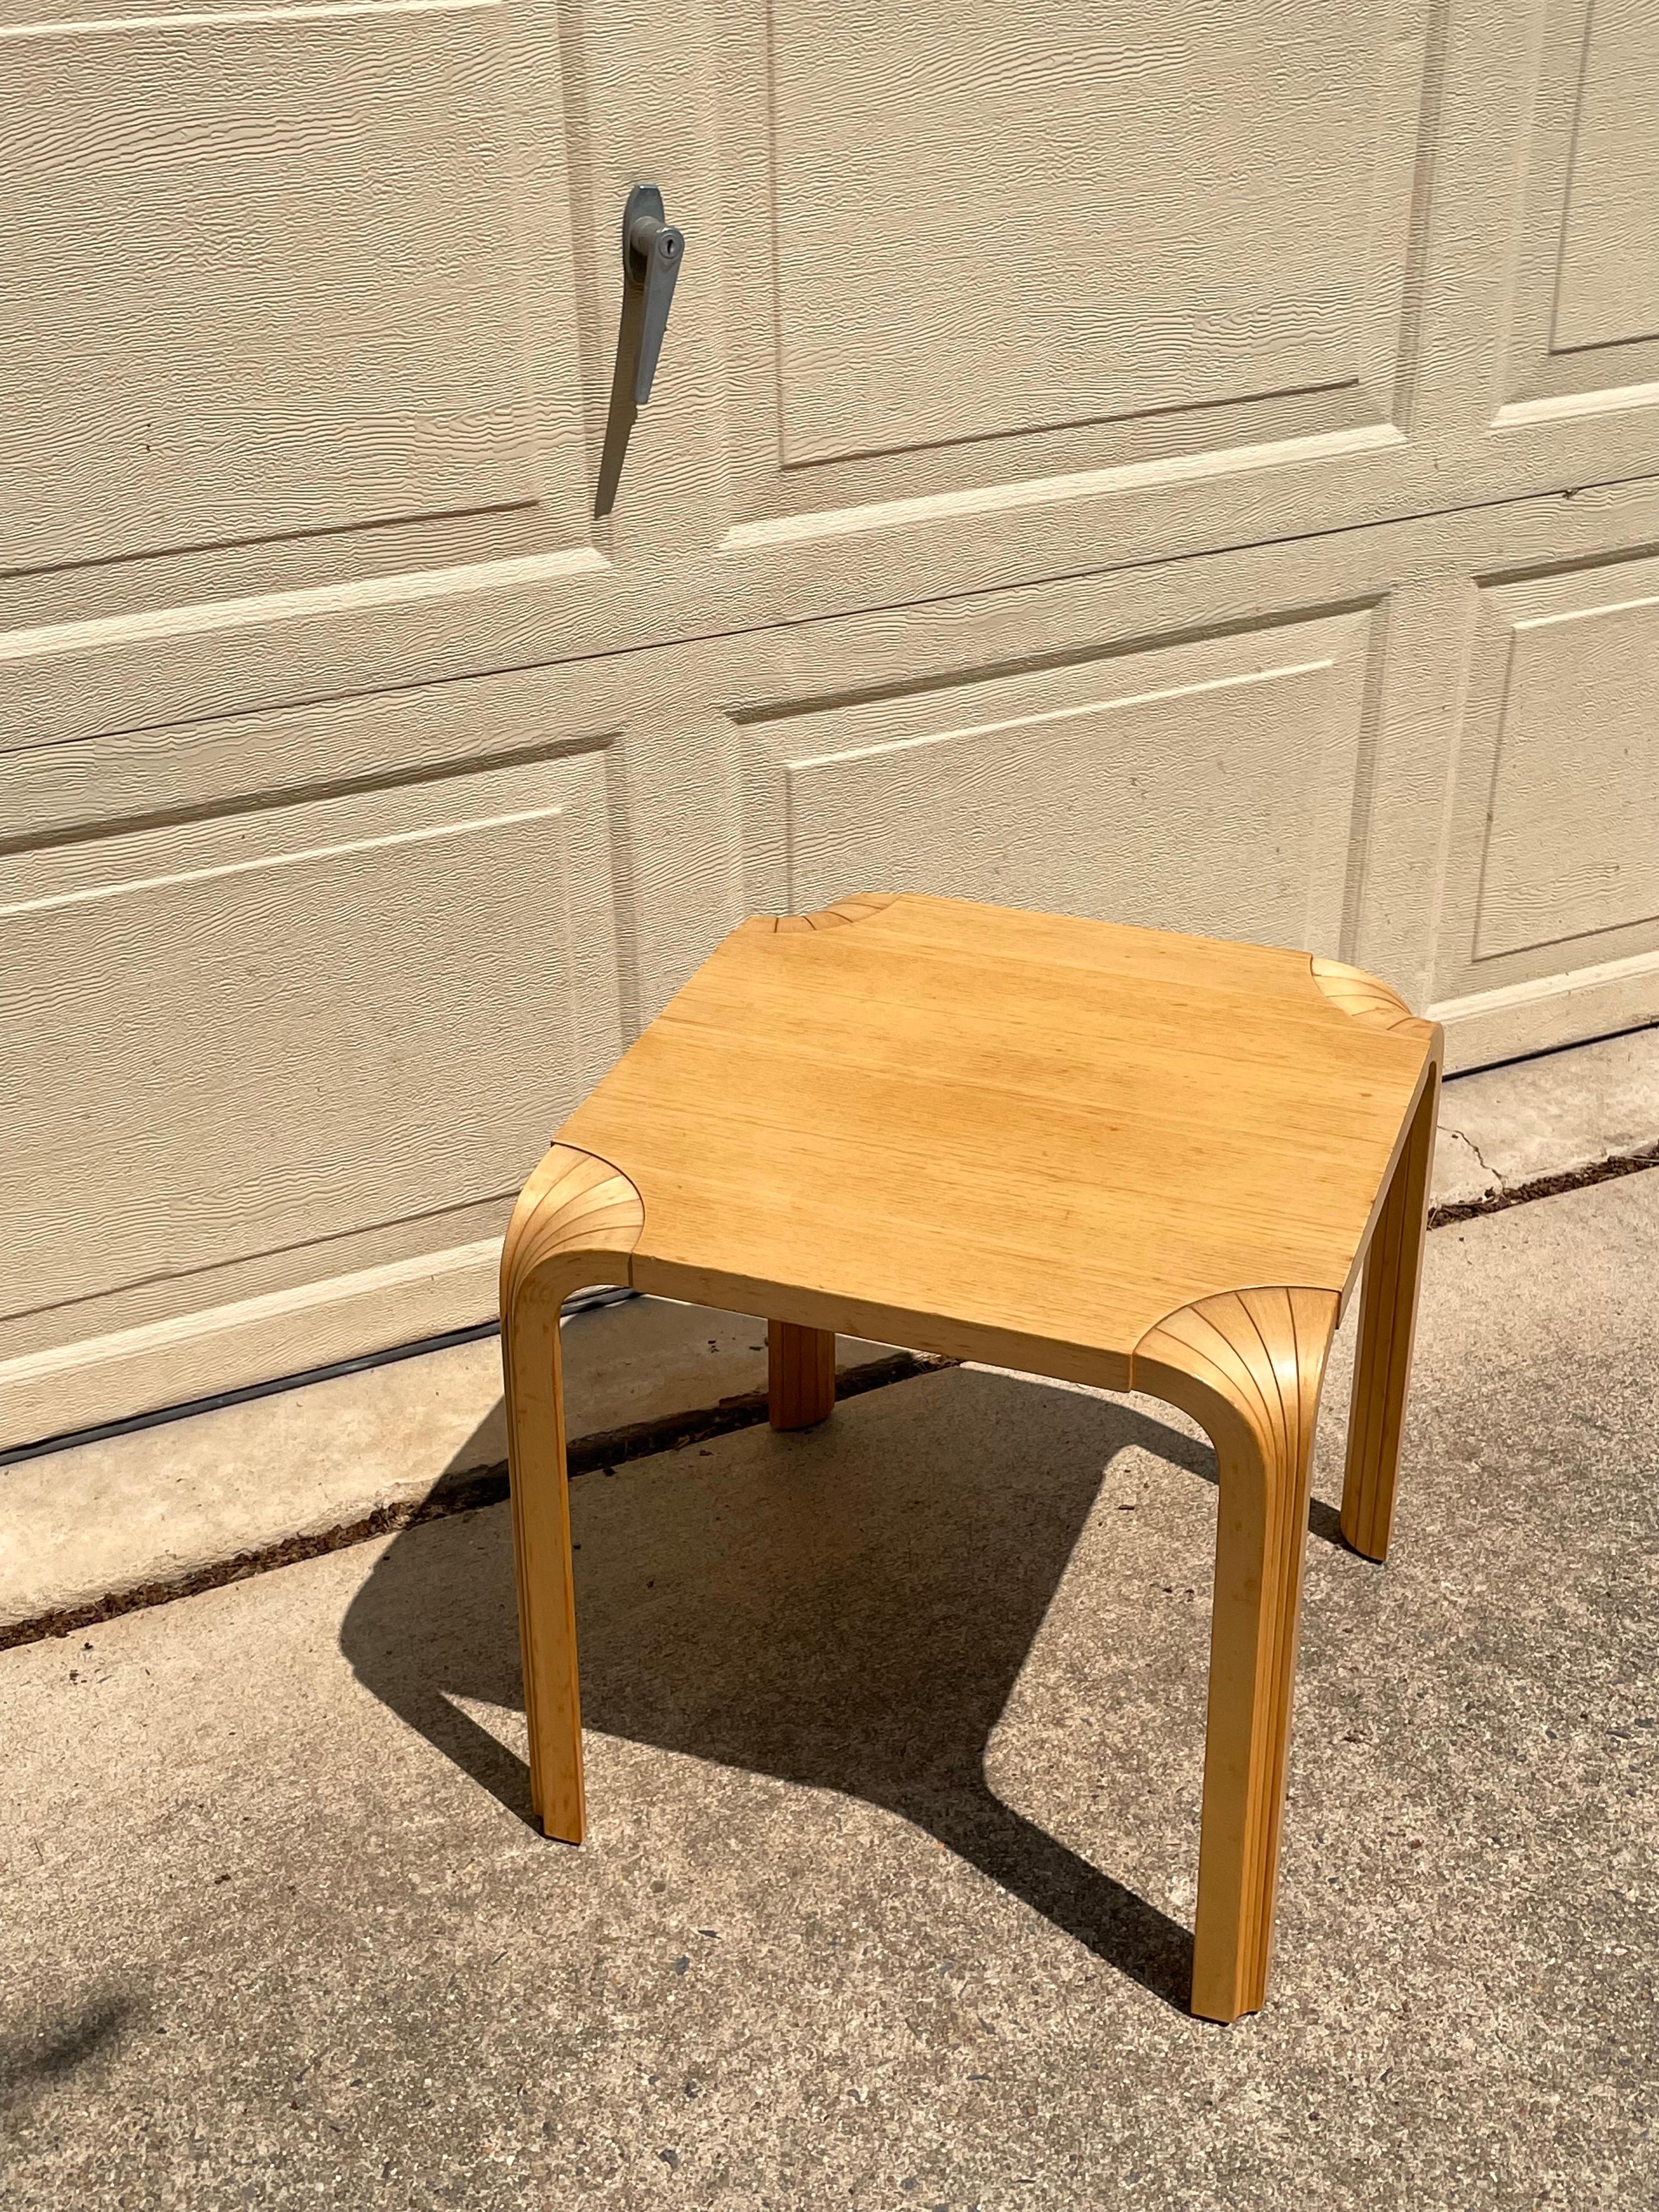 This stool was designed by Alvar Aalto in 1954 and features his impressive X-Leg design. 
X-Legs are created from splitting the traditional L-Leg in a longitudinal direction and re-connecting the pieces to create an intricate fan-like design.